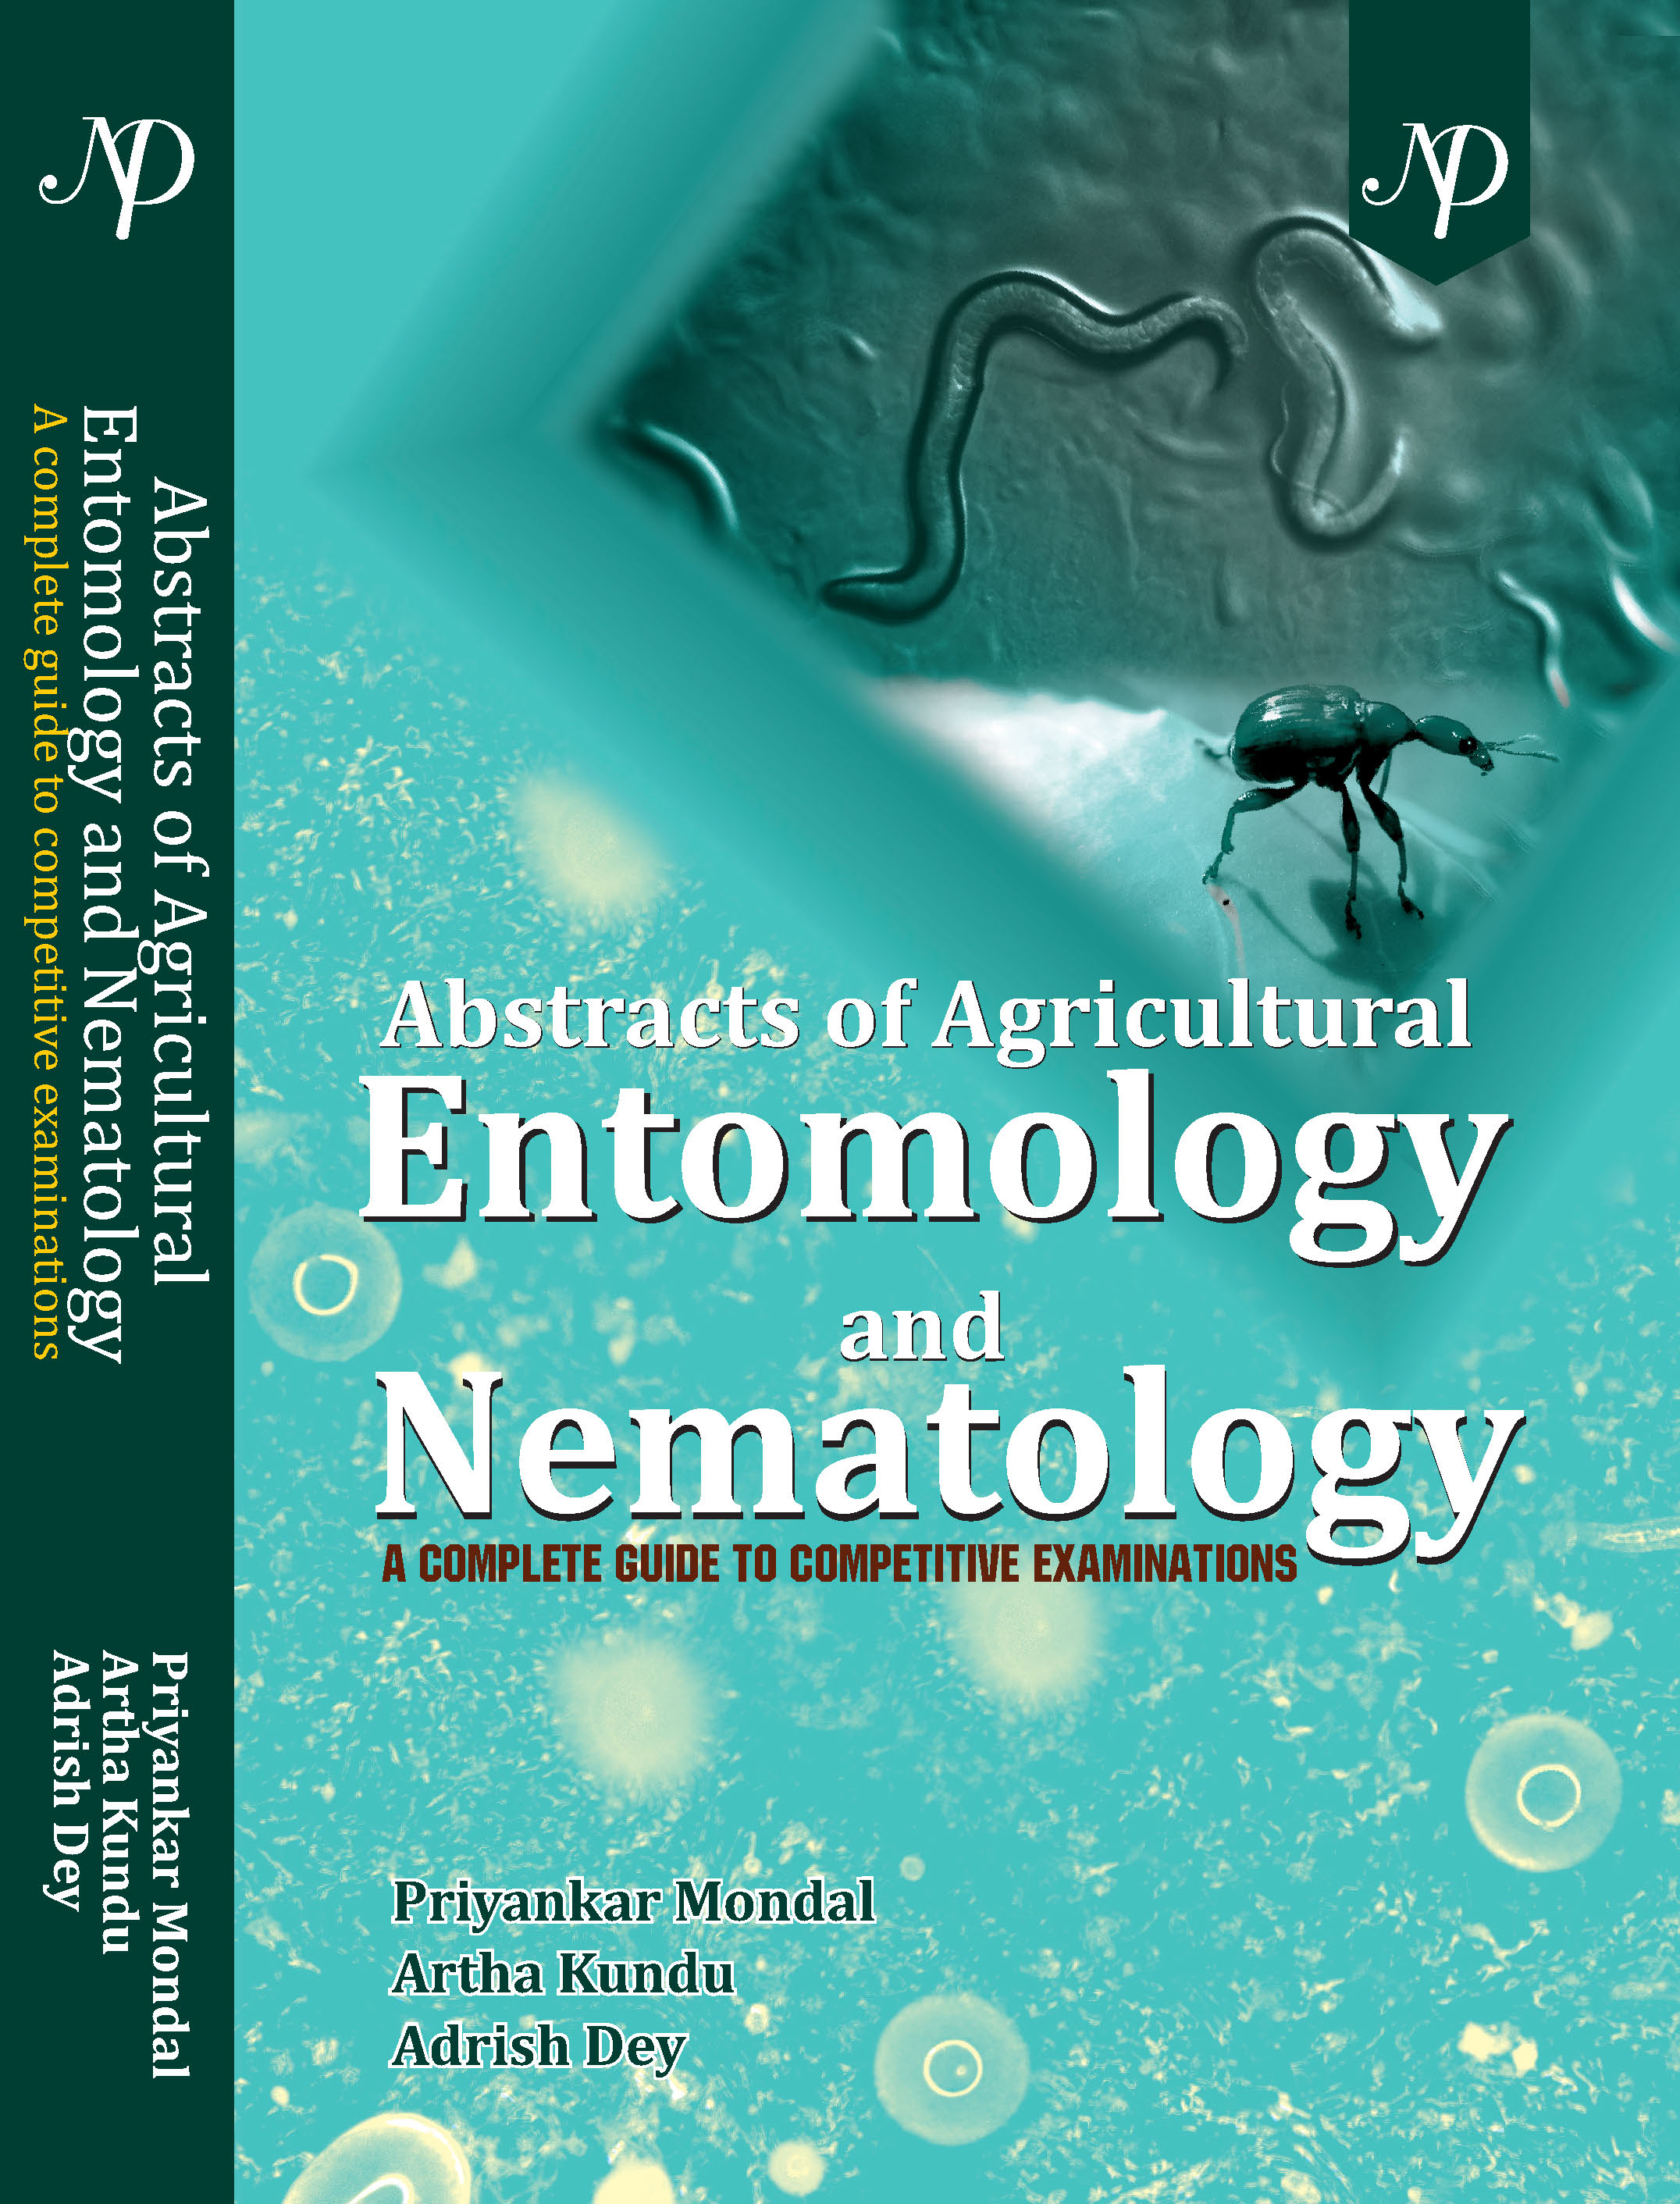 Abstracts of Agricultural Entomology & Nematology Cover.jpg